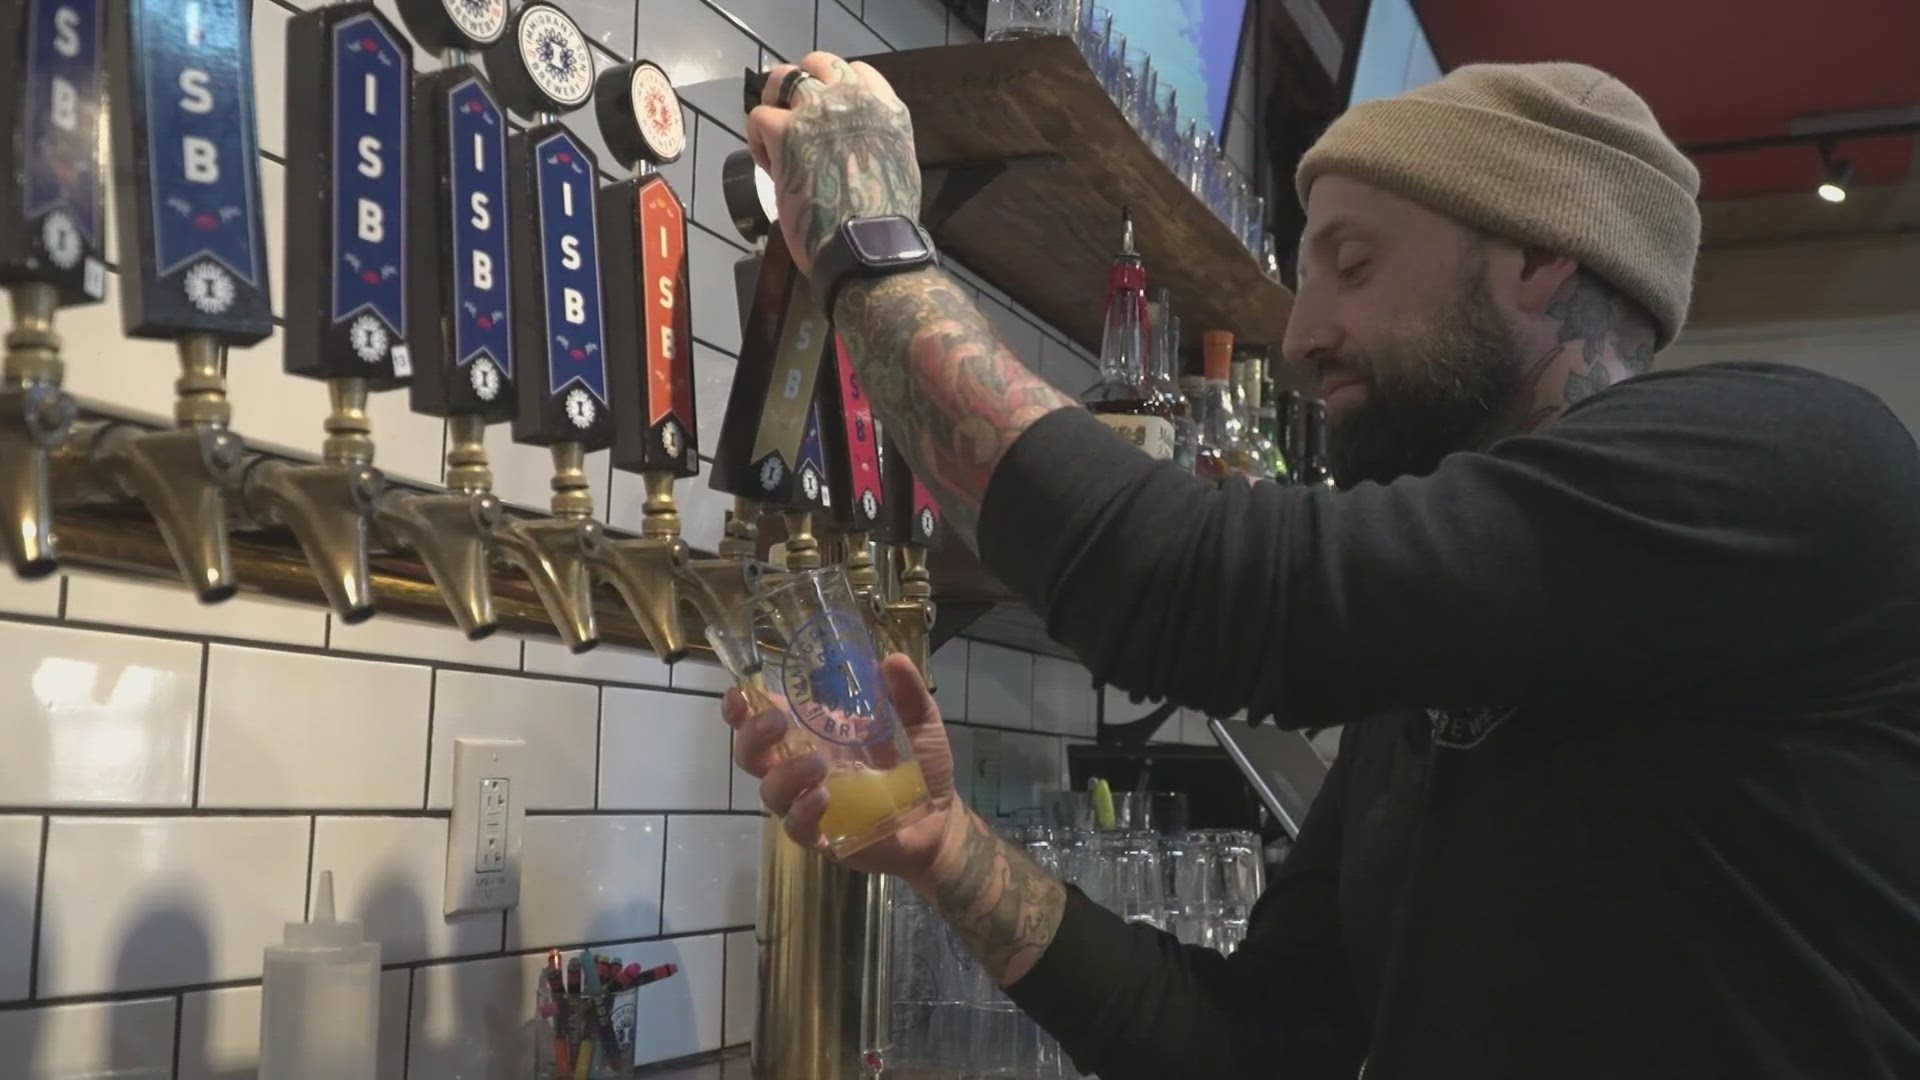 The lead bartender at Immigrant Son Brewery has been sober for 7 years, and is supporting others through his work with the Cleveland chapter of Ben's Friends.